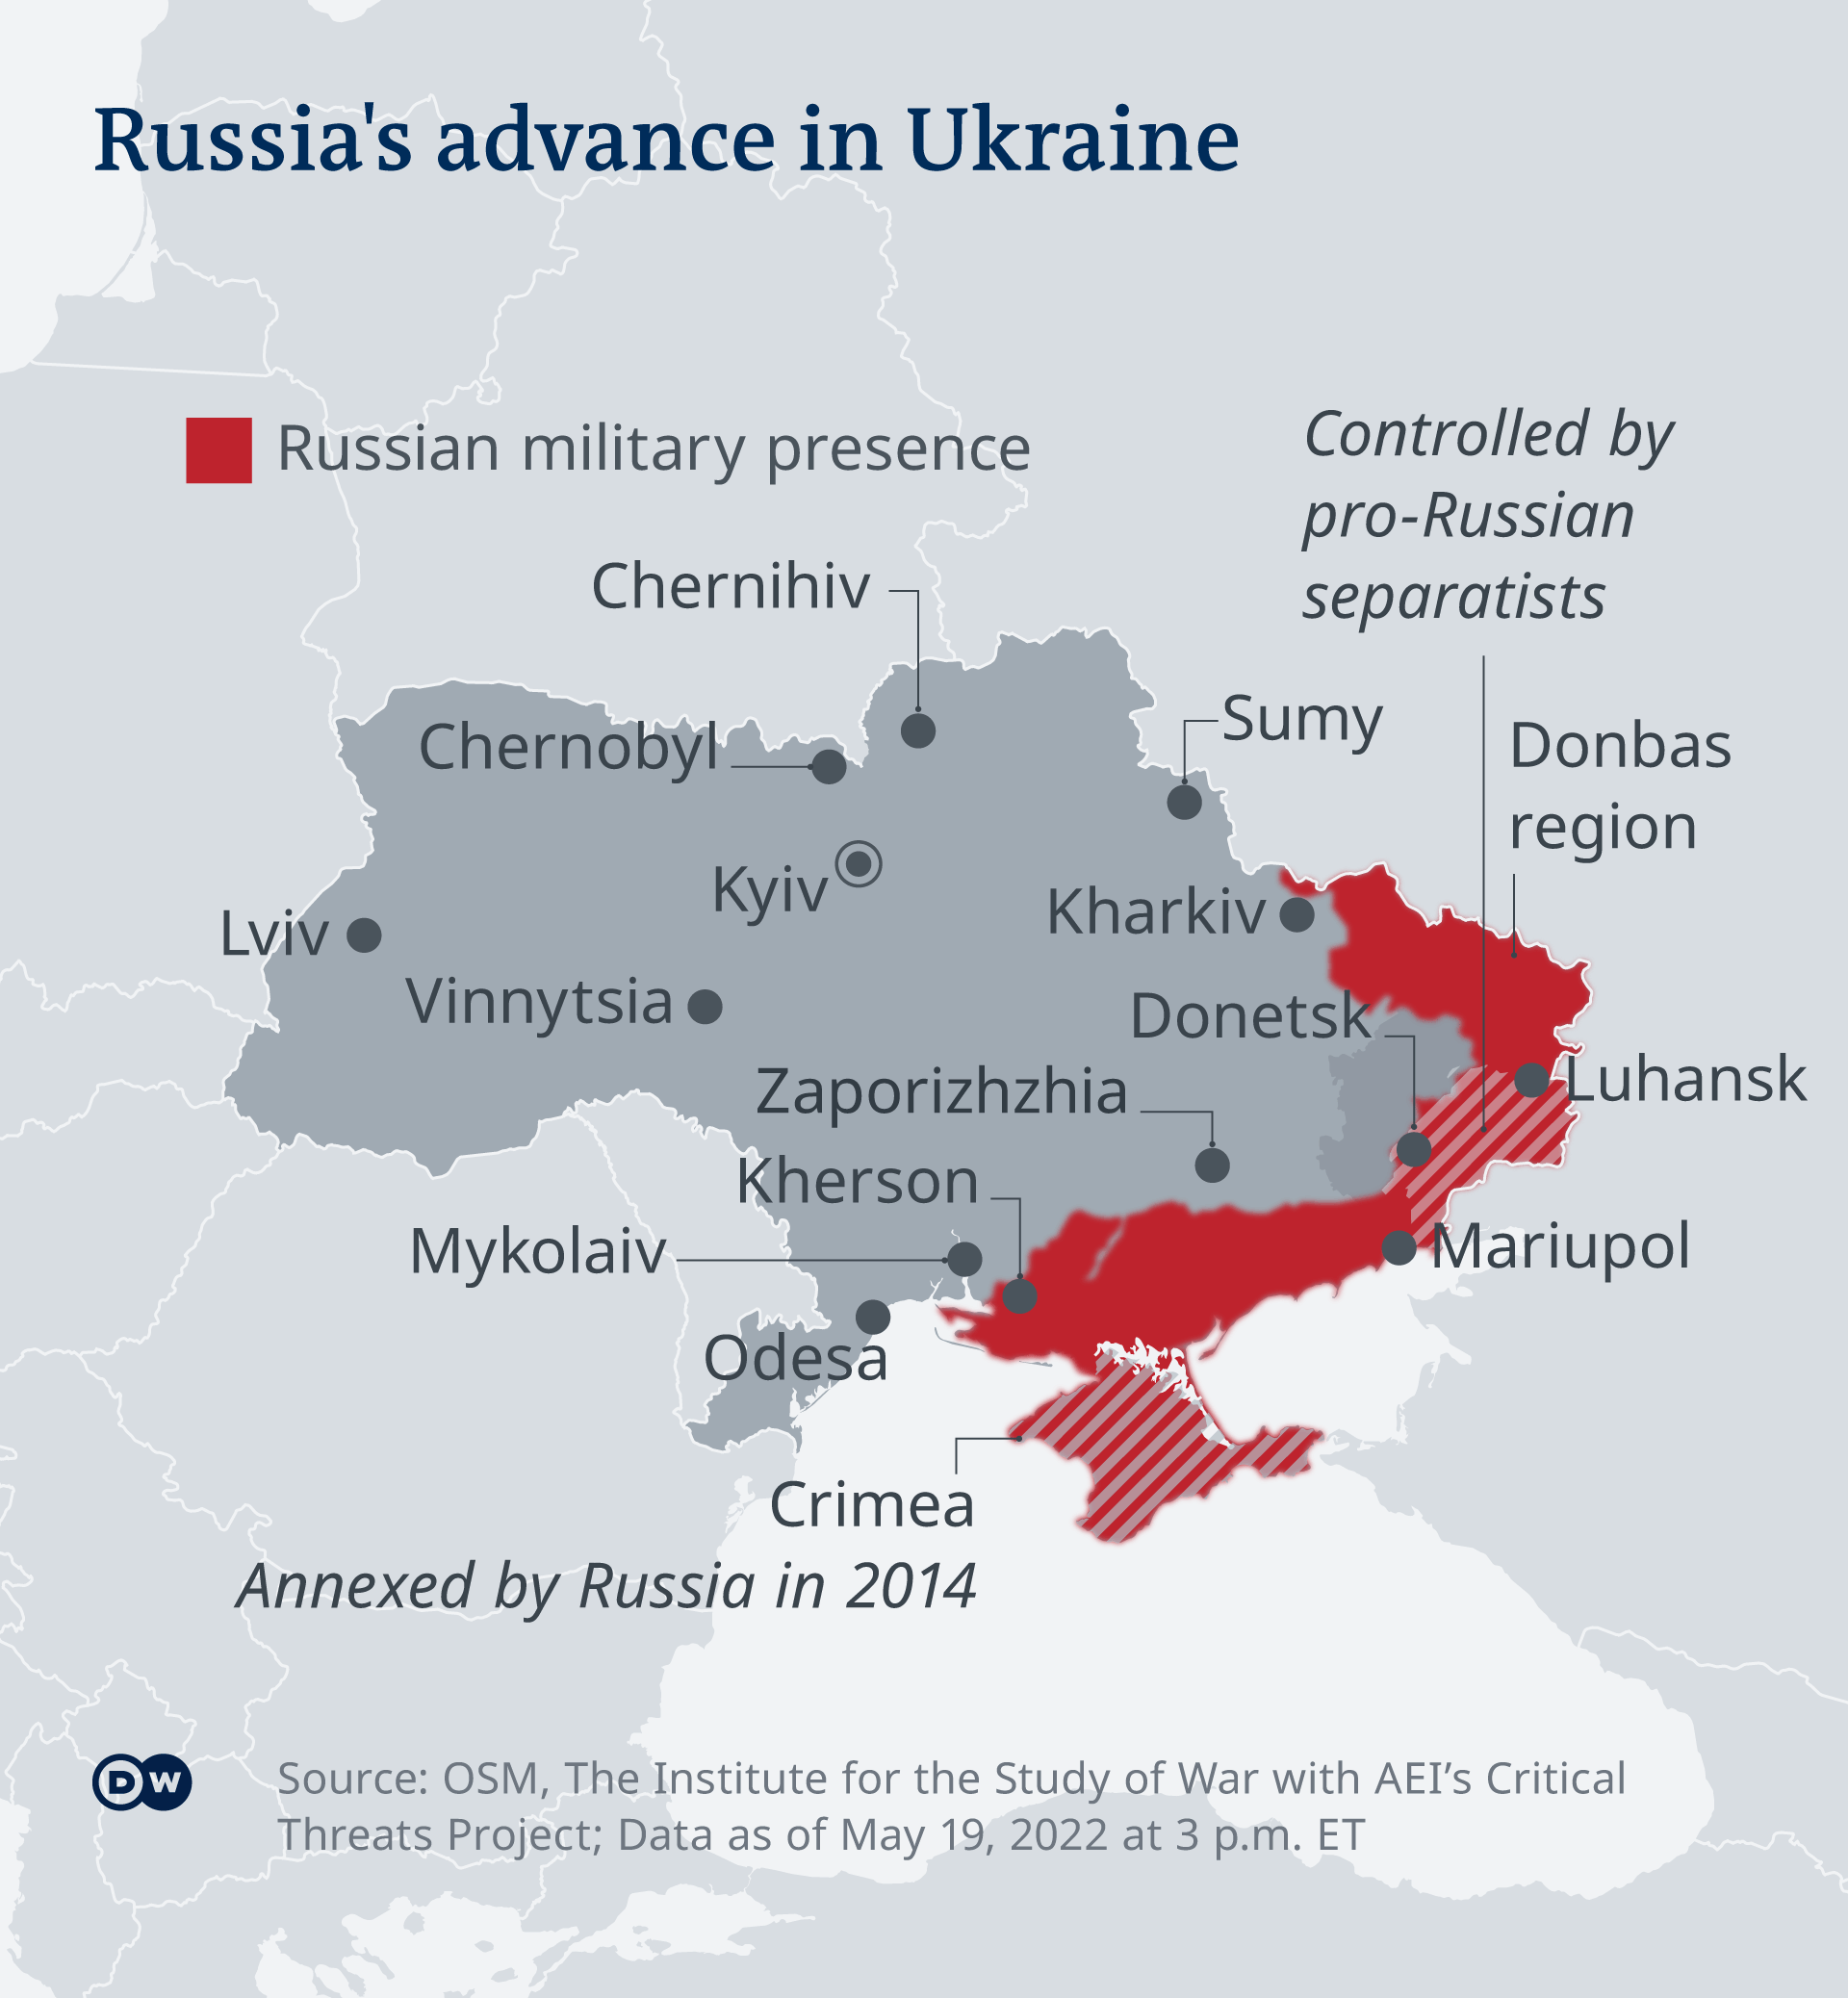 A map showing who controls which areas in eastern Ukraine